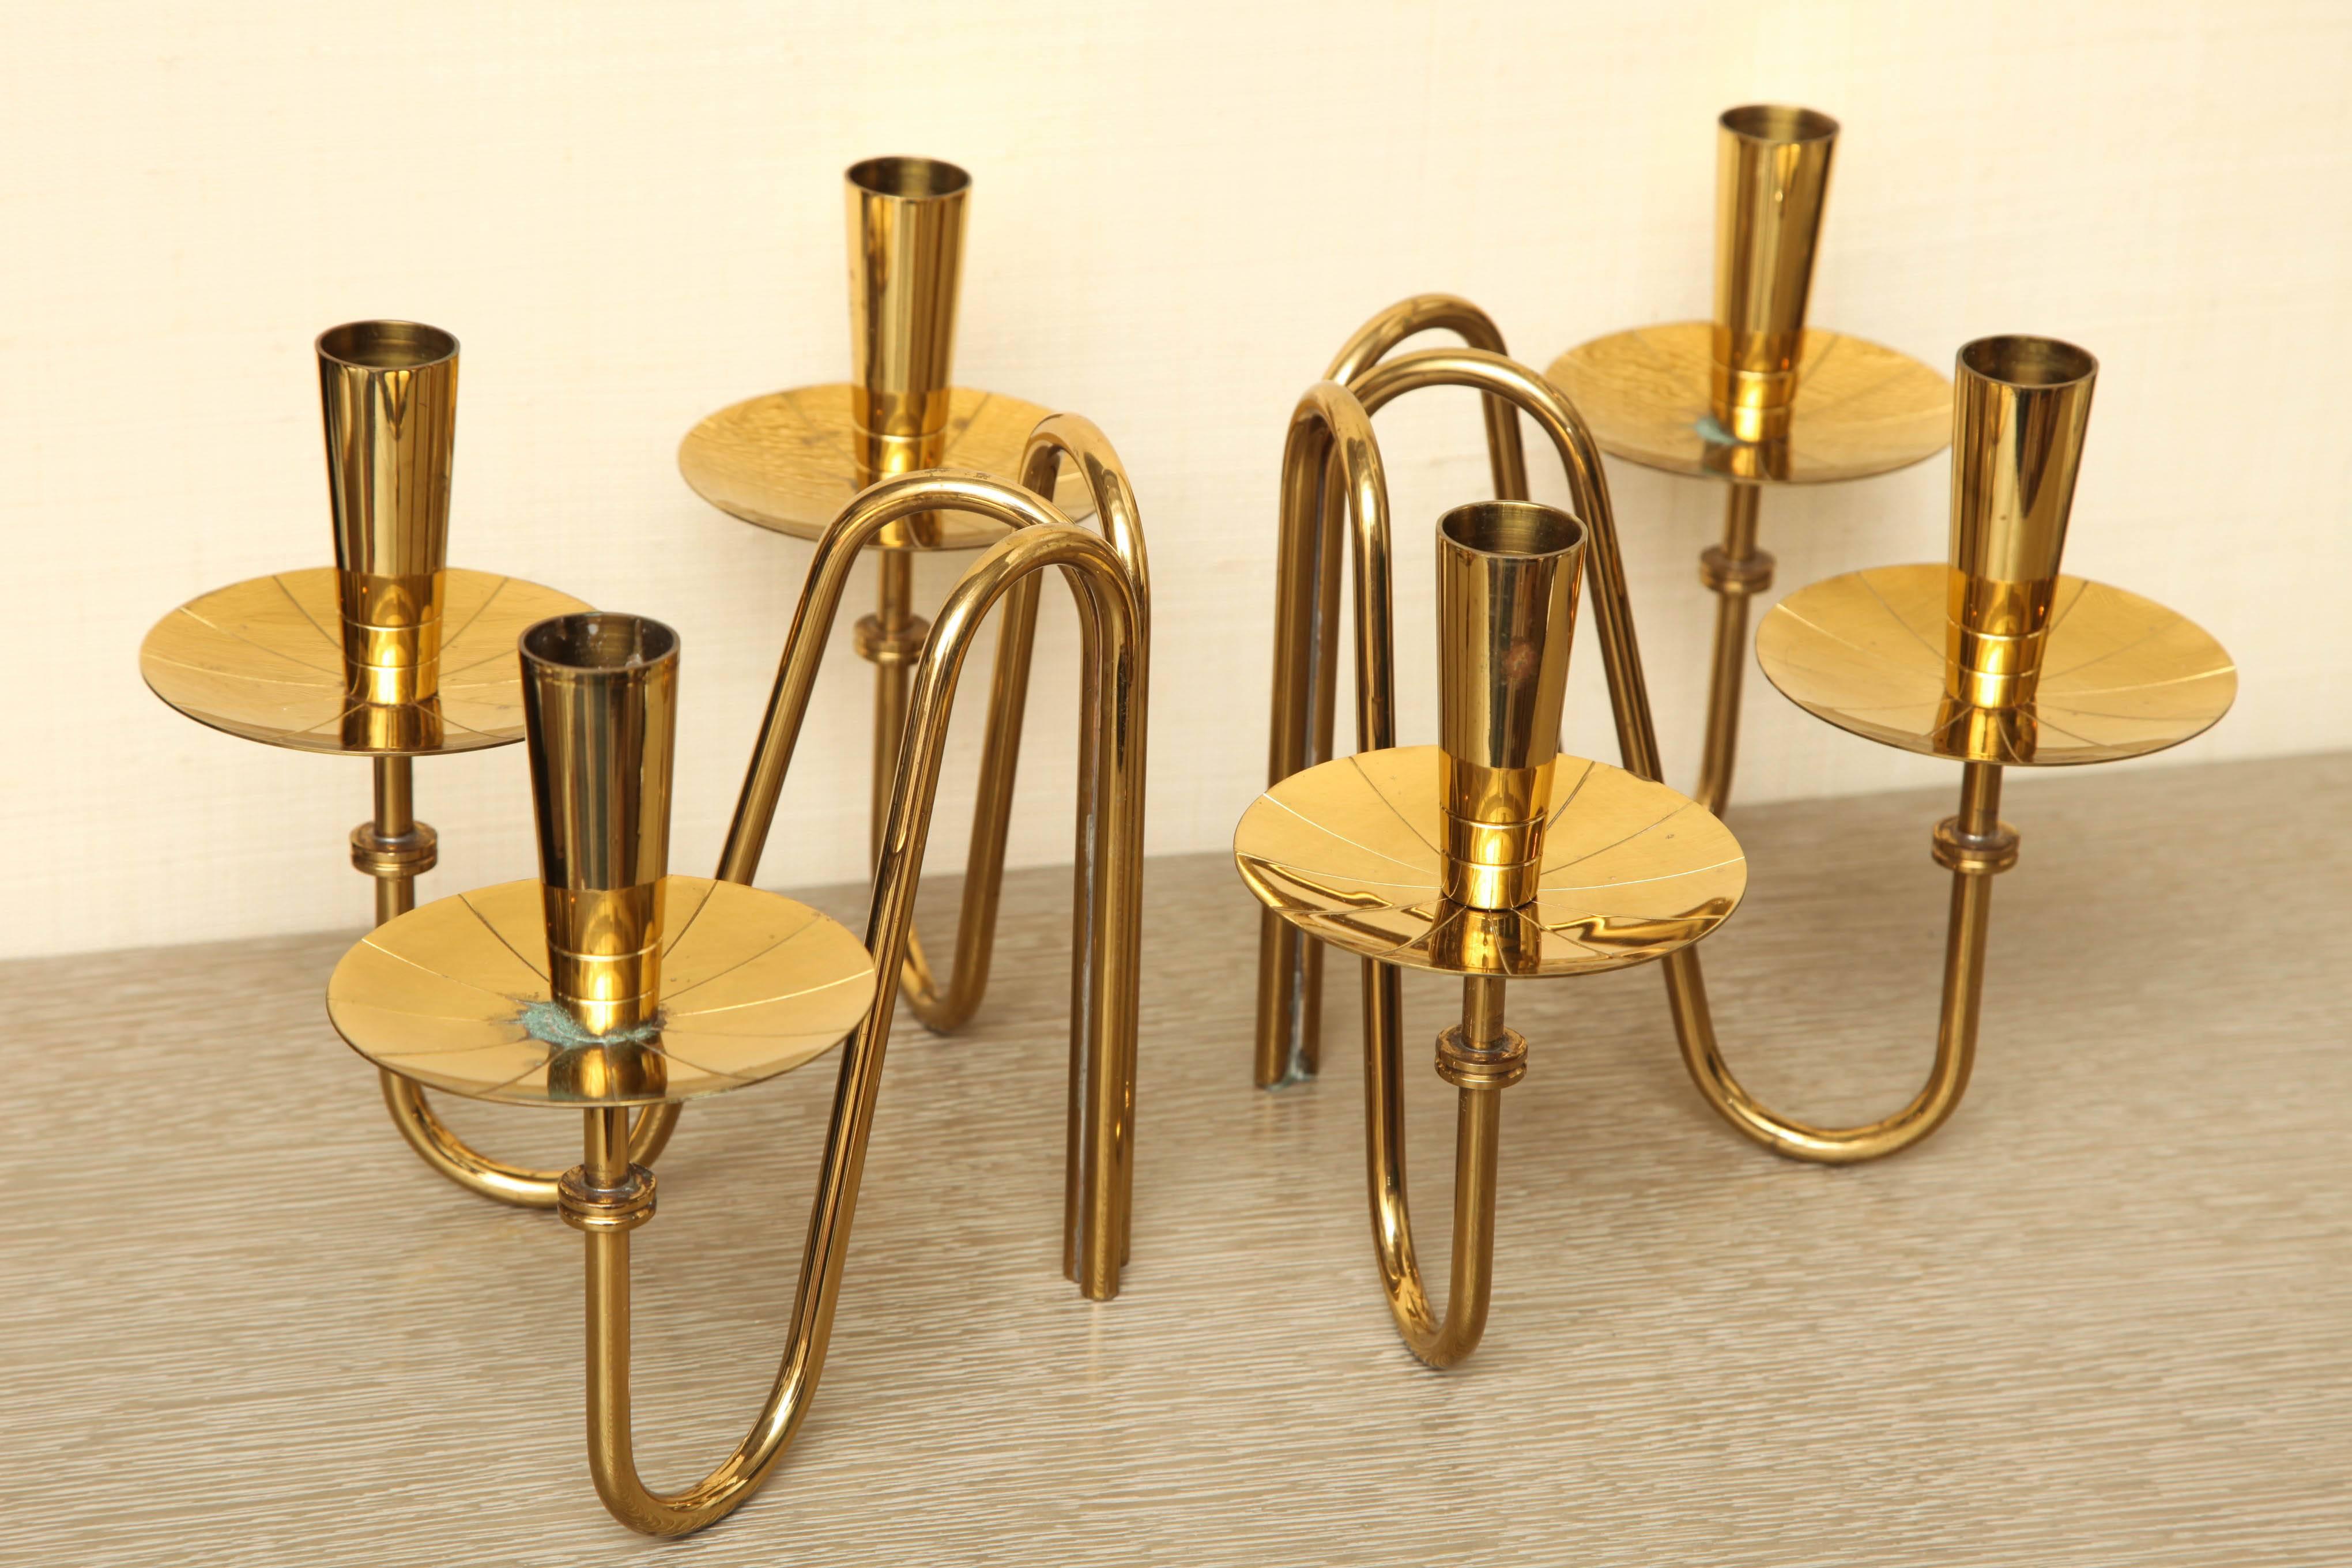 American Pair of Brass Candle Holders by Tommi Parzinger, circa 1960 For Sale